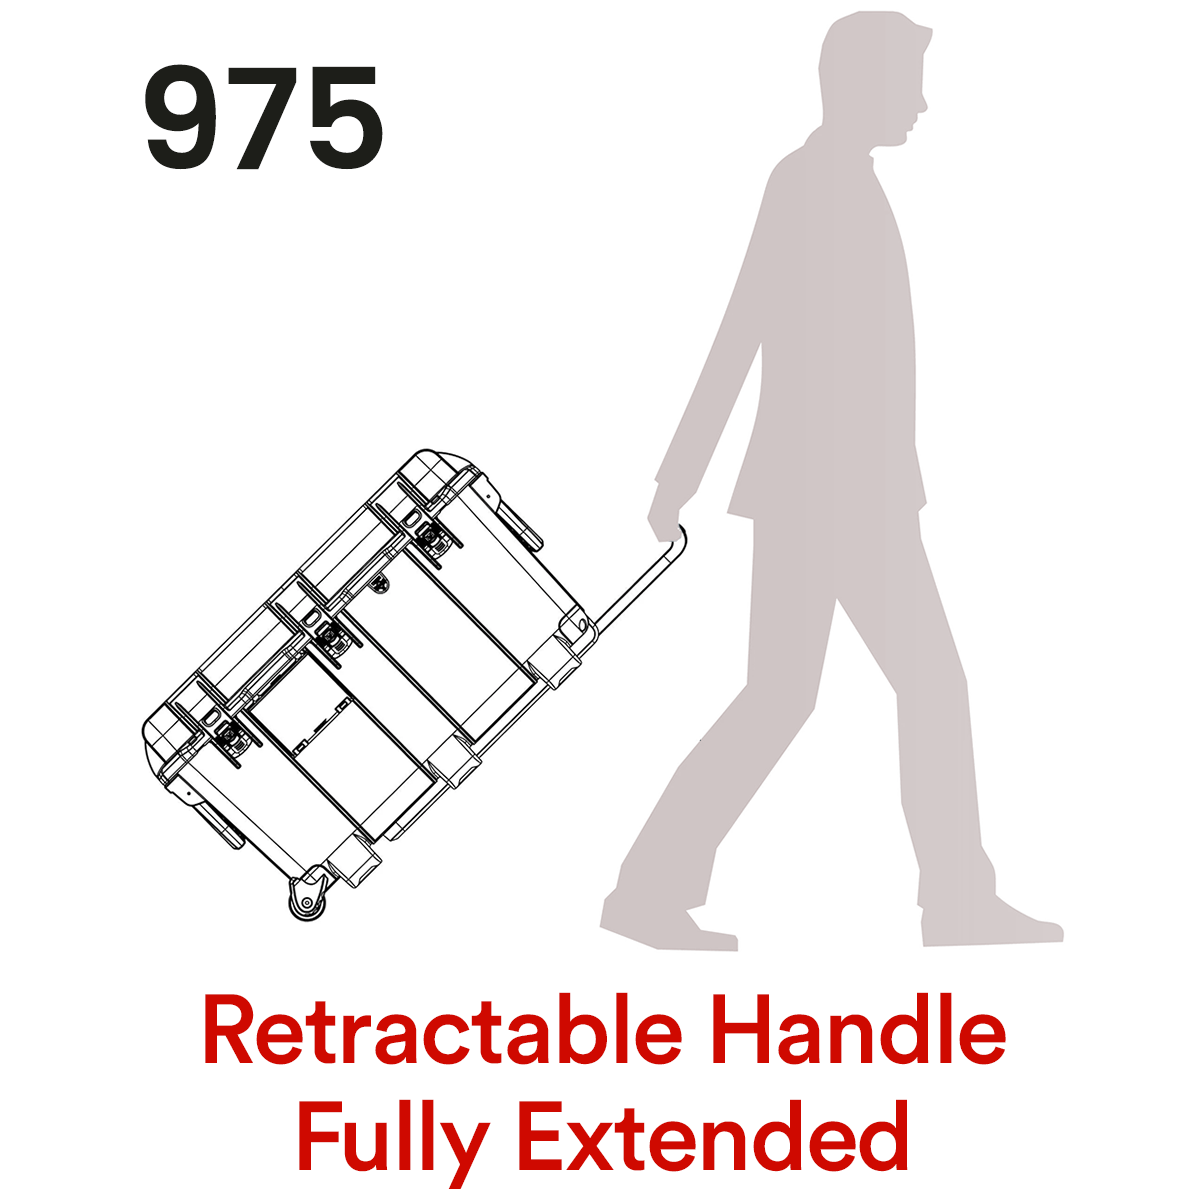 NANUK 975 Retractable Handle - Fully Extended